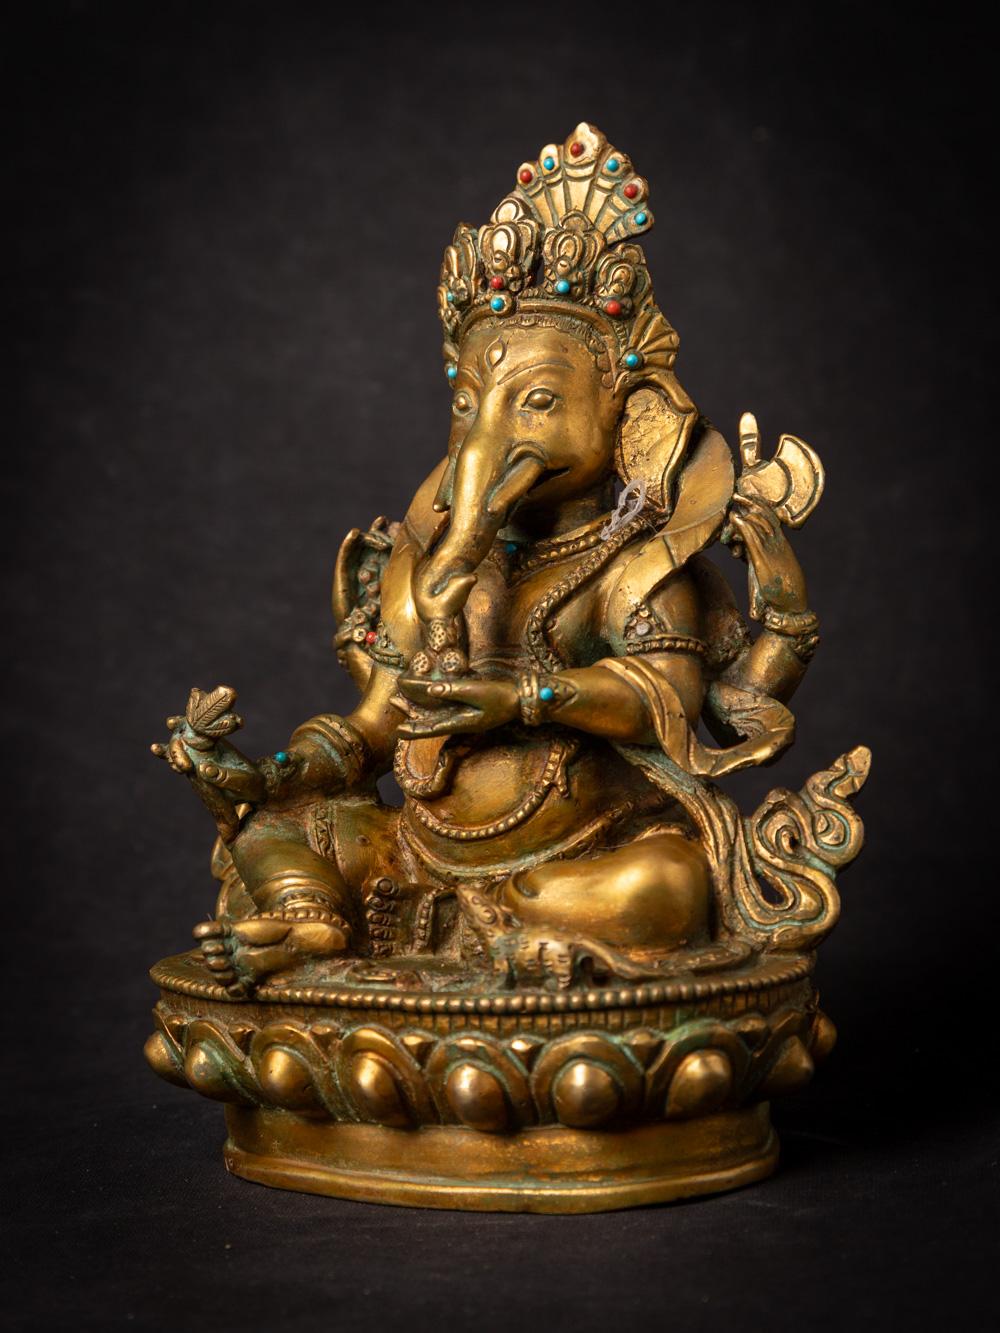 This old bronze Nepali Ganesha statue is a remarkable representation of the Hindu deity Ganesha, known as the remover of obstacles and the god of new beginnings. Crafted from bronze and standing at 20.7 cm in height, with dimensions of 16.3 cm in